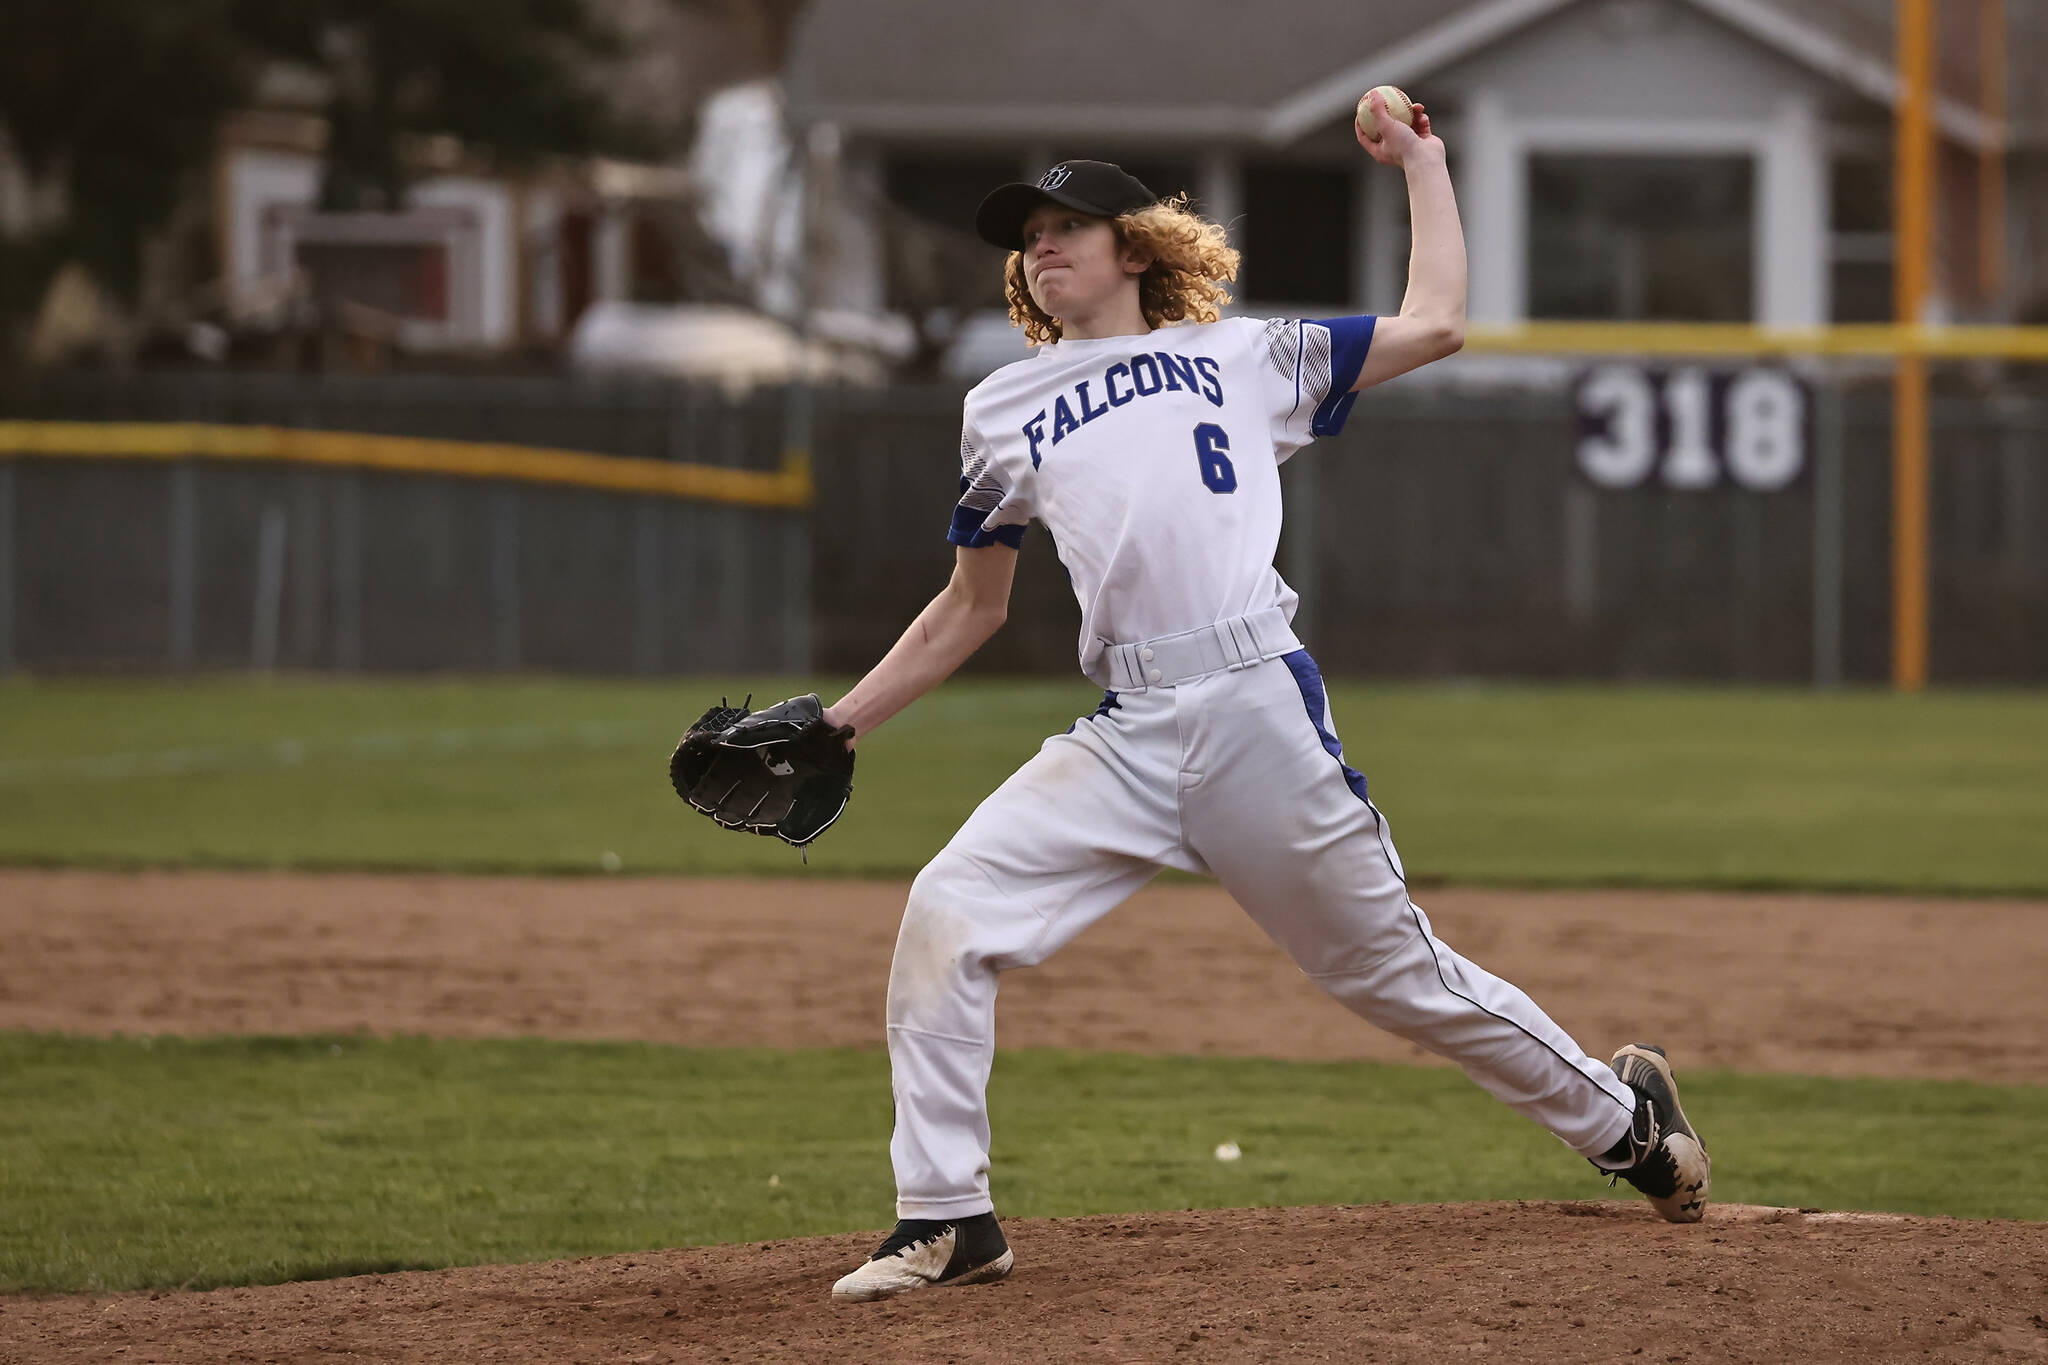 Junior Dylan Michalopoulos of South Whidbey winds up his throwing arm during an island-wide jamboree in Oak Harbor March 11. The event was the first of the season. The Falcons will be playing a double header on home turf this Saturday against Bellingham. (Photo by John Fisken)